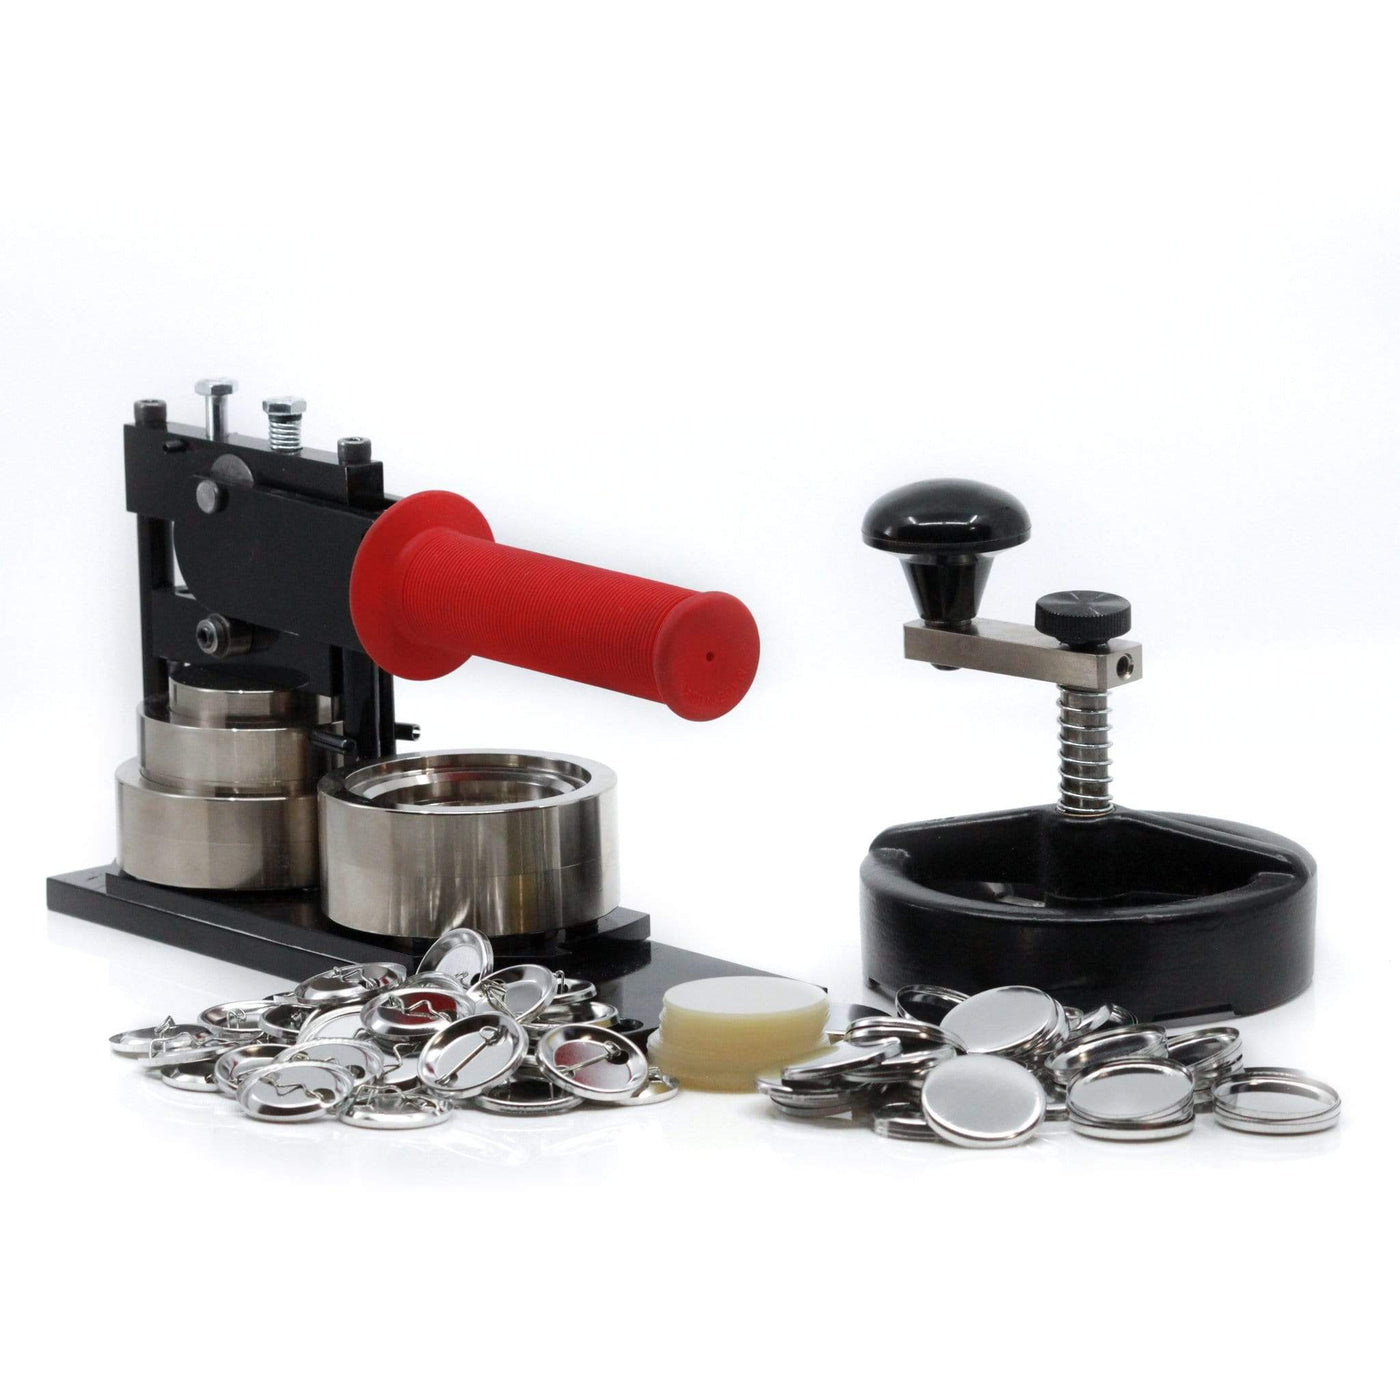 Model 125 "Mini Magic", 1.25" Button Making Starter Kit with button machine, cutter and pin back parts